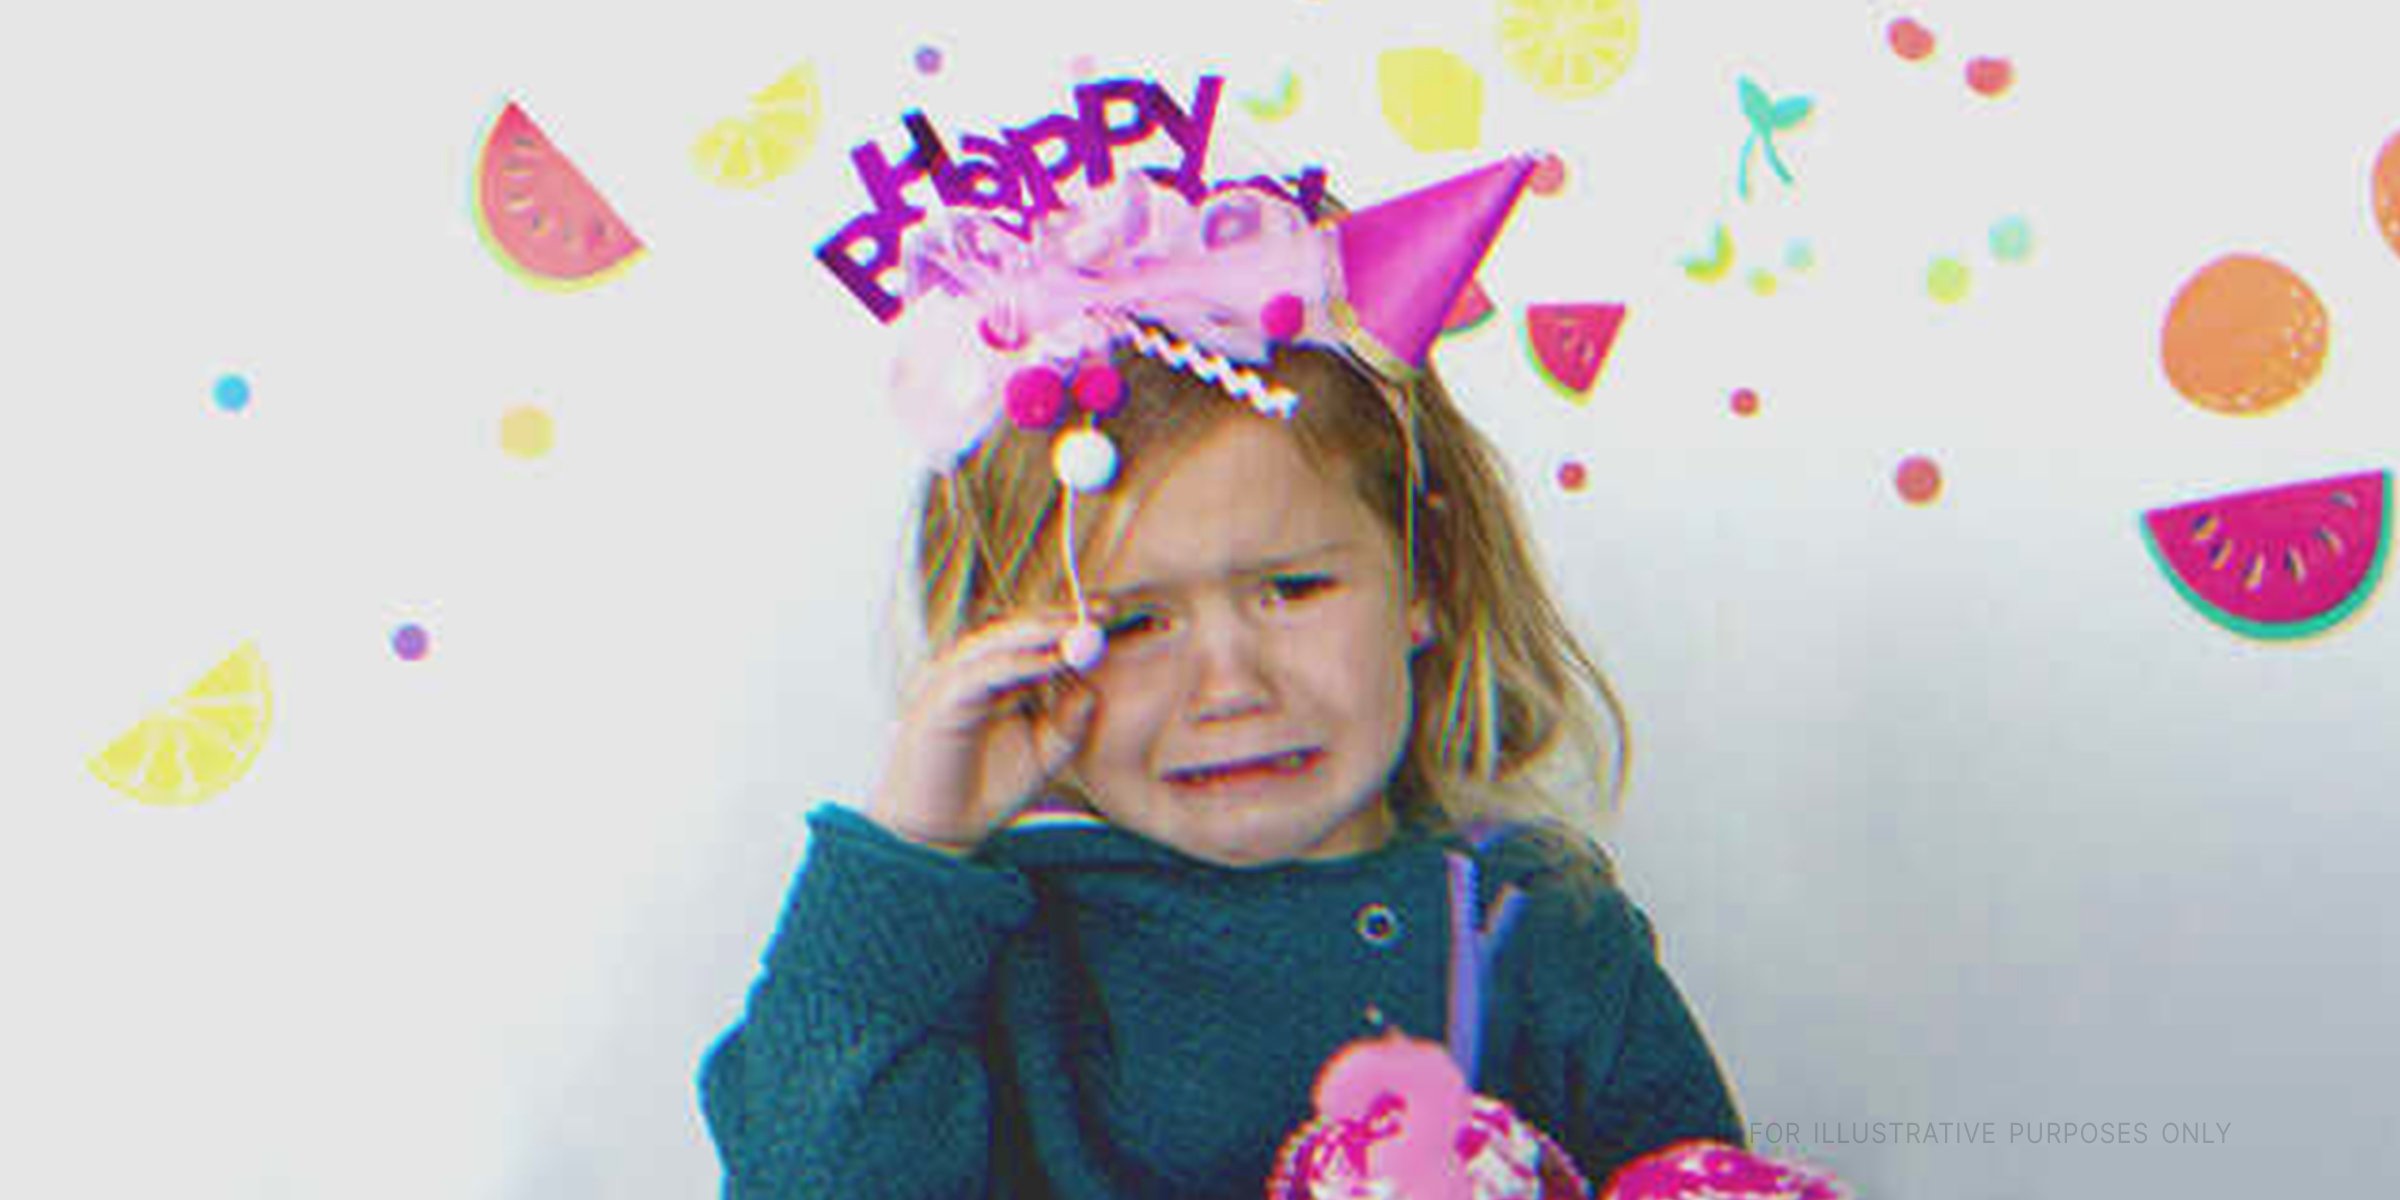 Girl with birthday hat crying. | Source: Getty Images